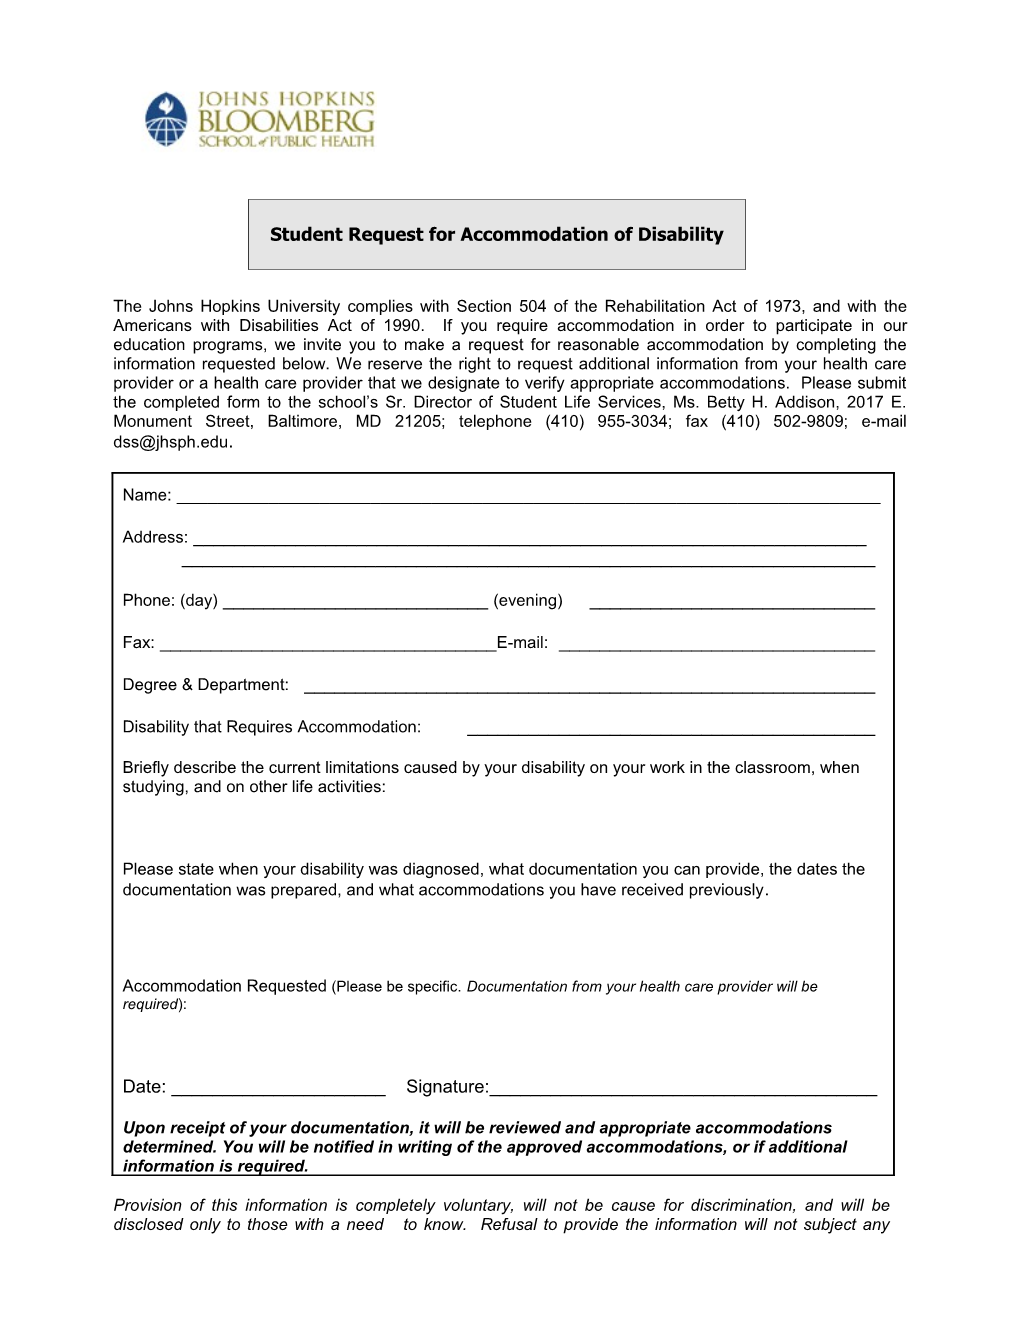 Student Request for Accommodation of Disability